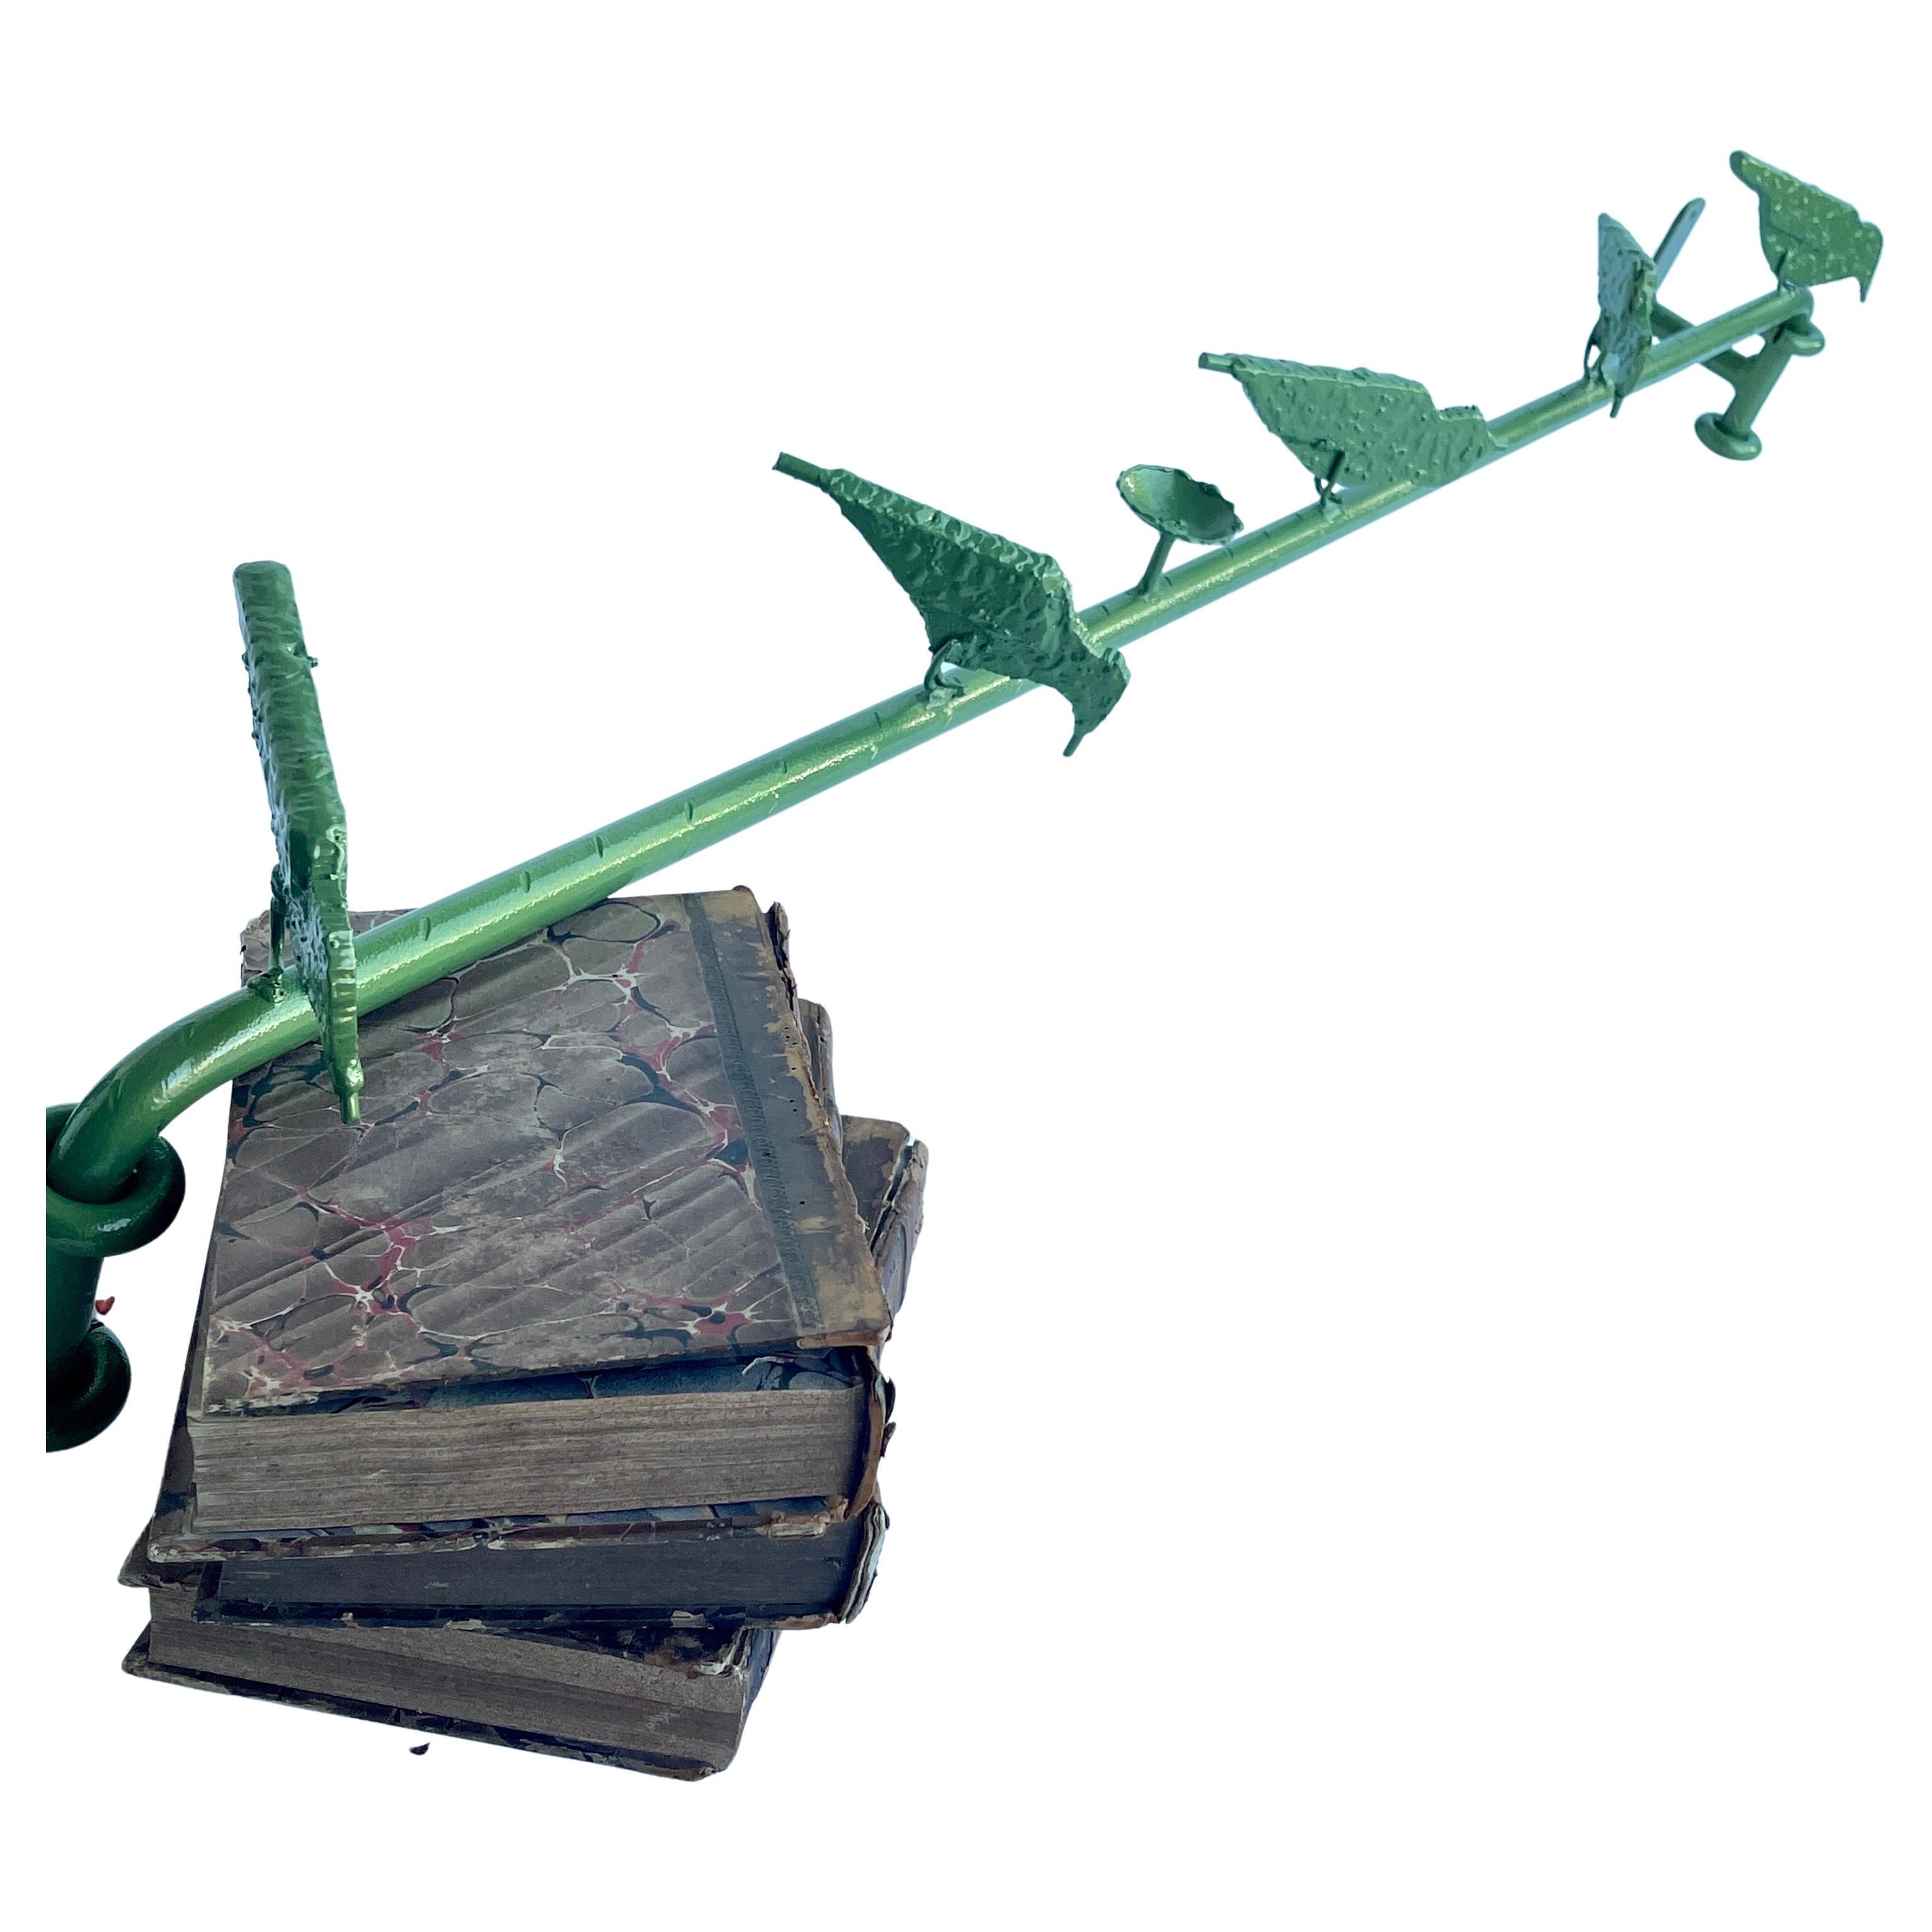 Hand-Crafted Iron Wall Bar Rod With Birds, Green Powder-Coated For Sale 3